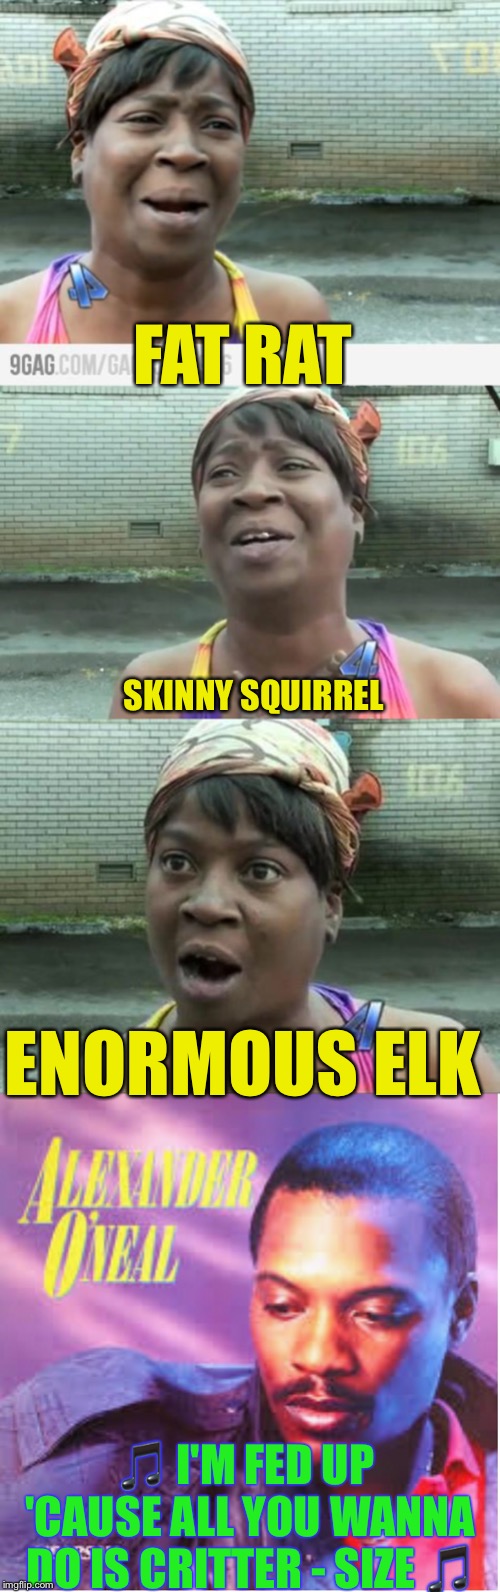 Oh ‘ Neal ! | FAT RAT; SKINNY SQUIRREL; ENORMOUS ELK; 🎵 I'M FED UP 'CAUSE ALL YOU WANNA DO IS CRITTER - SIZE 🎵 | image tagged in sweet brown,criticize,critters,misheard lyrics,80s music,alexander oneal | made w/ Imgflip meme maker